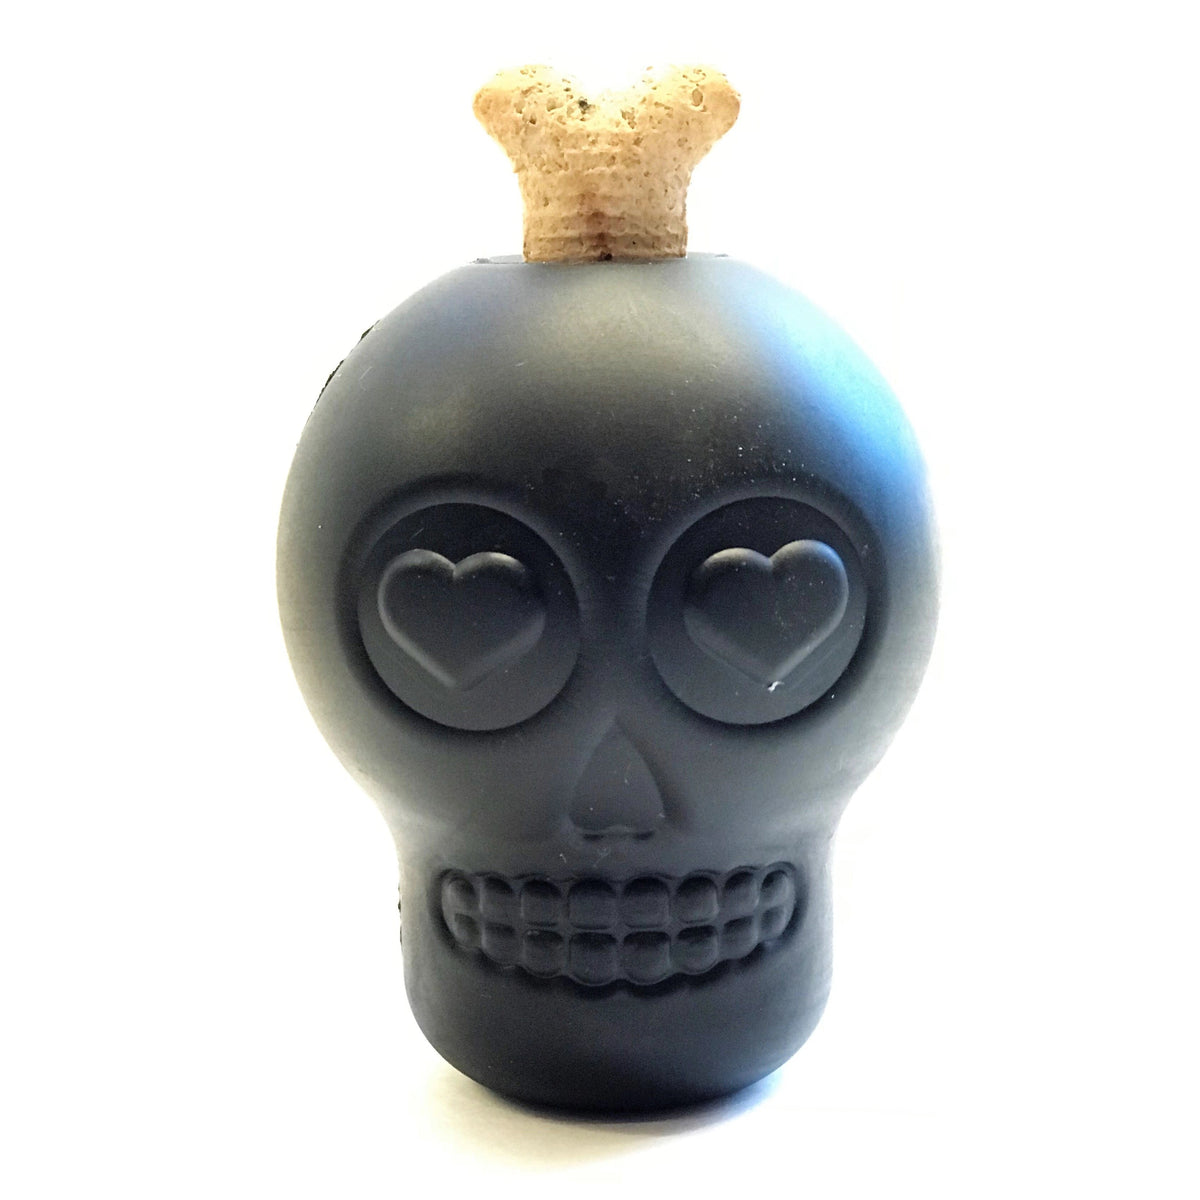 Sodapup MKB Rubber Skull Black Large-Four Muddy Paws